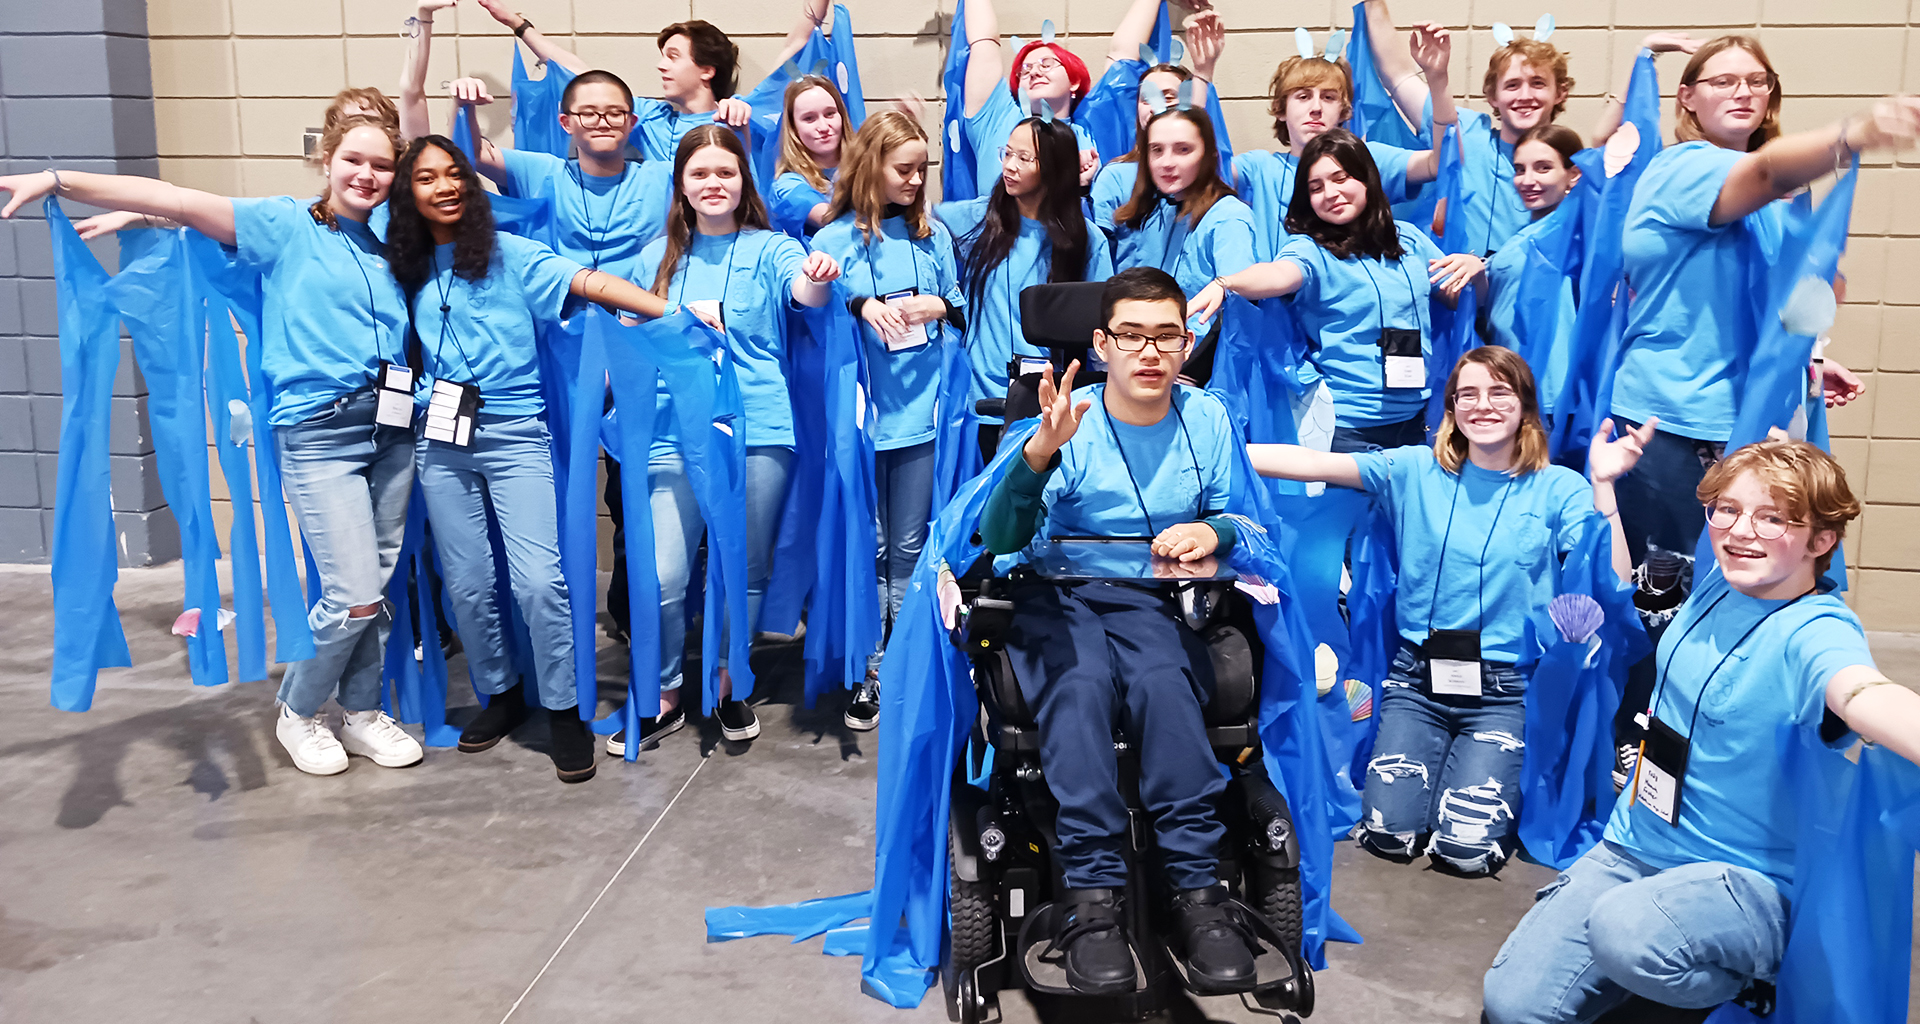 Large group of students dressed in blue pose for a photo